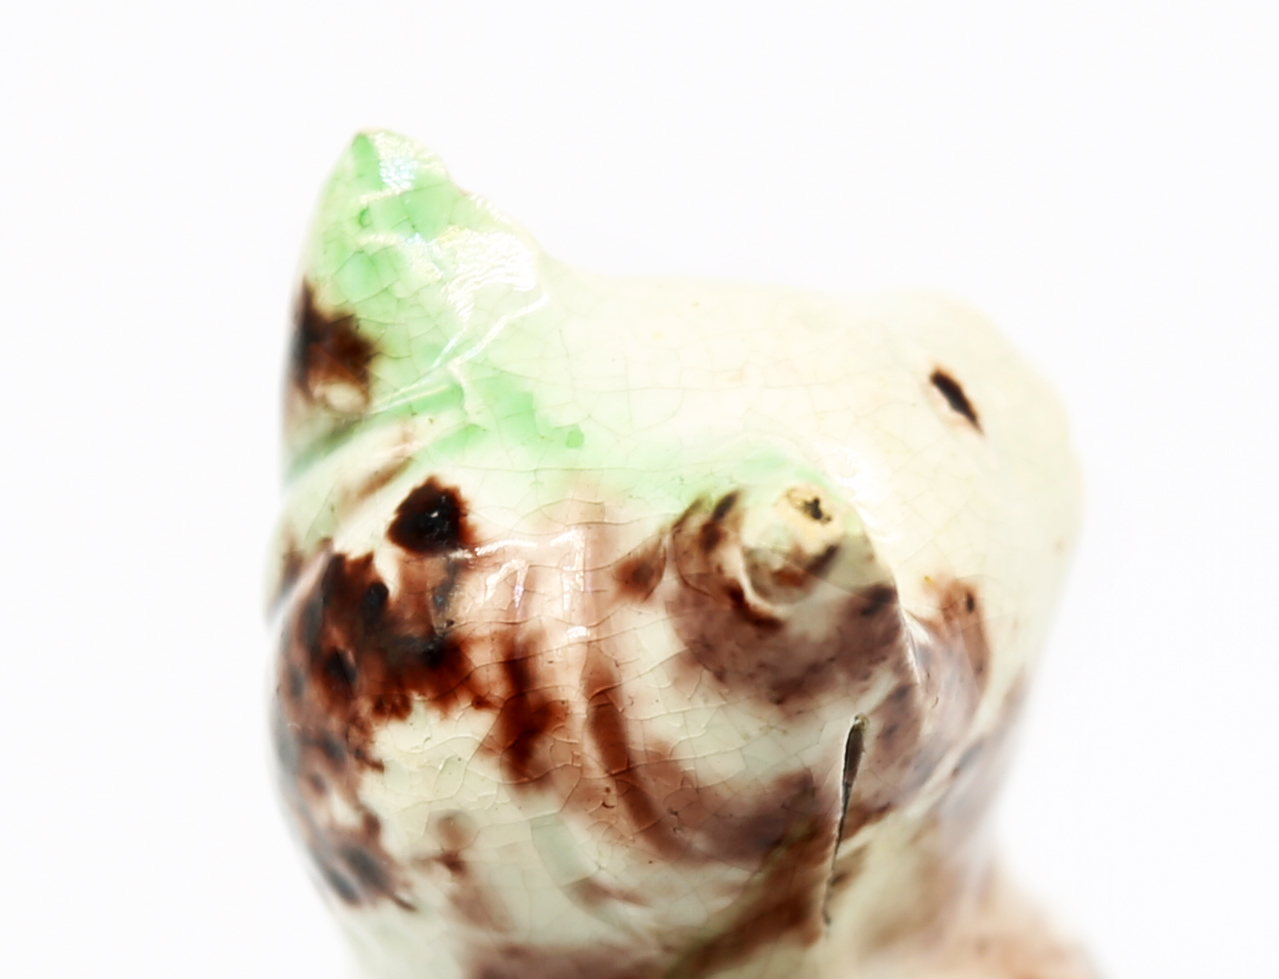 A small Staffordshire Whieldon creamware seated cat, sponge decorated in shades of green and brown - Image 6 of 7